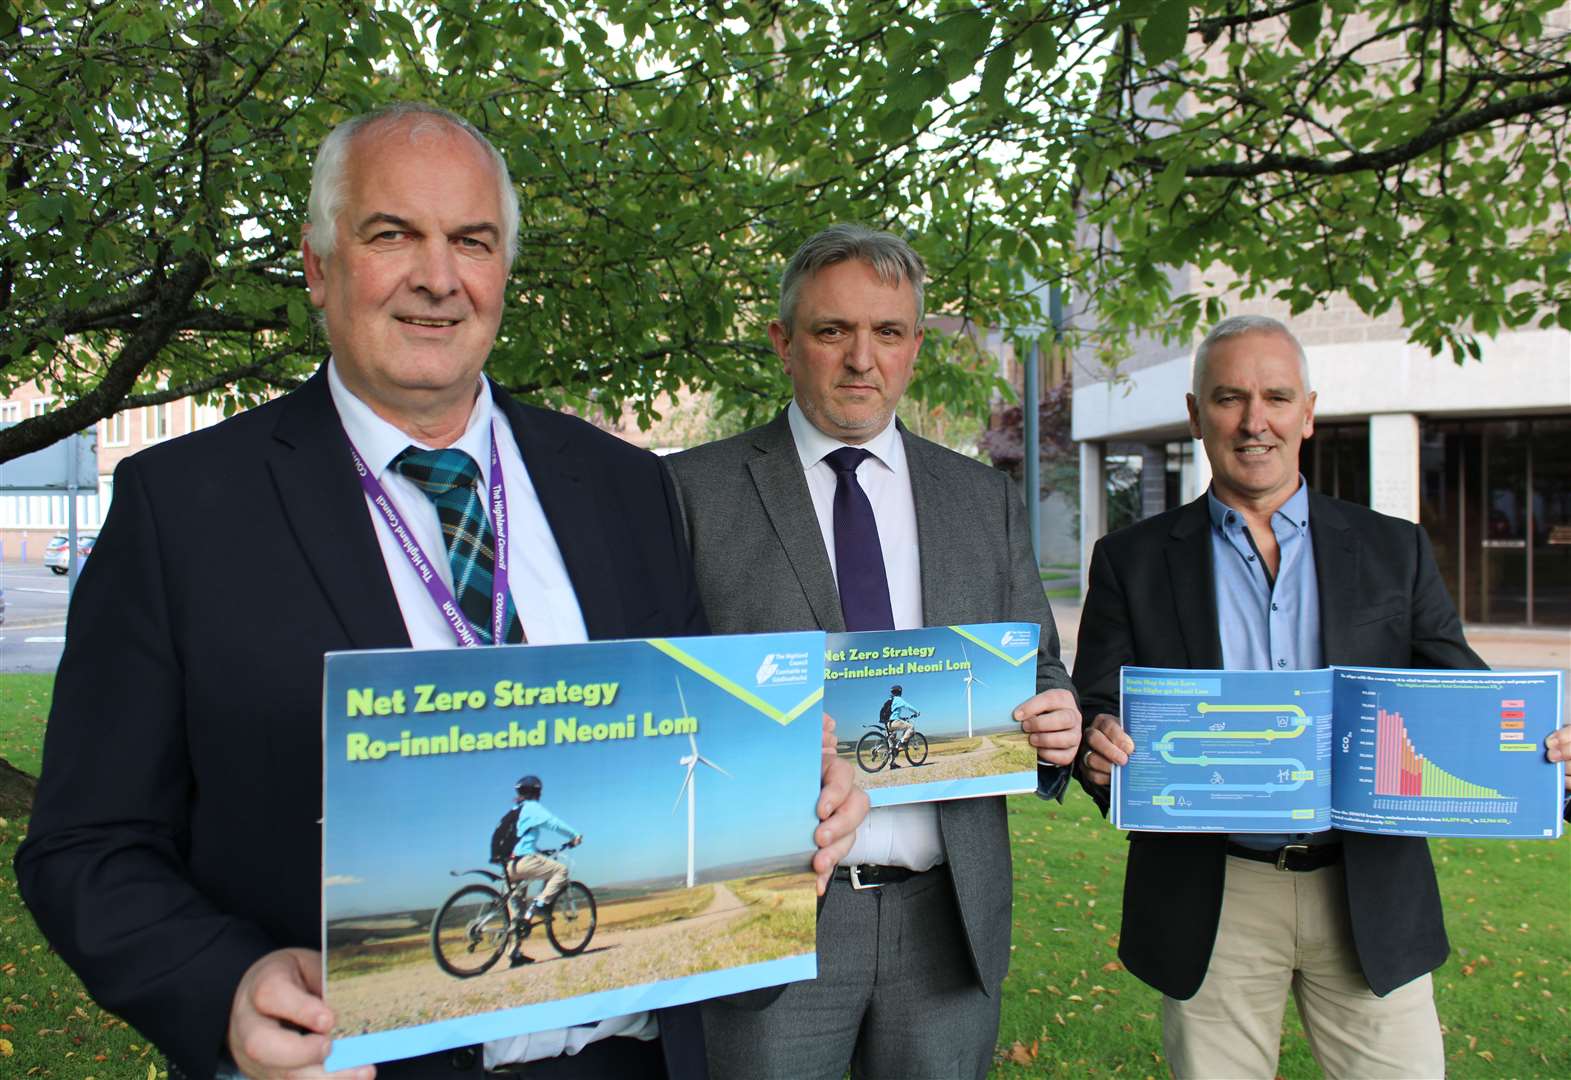 Council leader Raymond Bremner, chief executive Derek Brown and chair of the climate change committee Karl Rosie with the council's net zero startegy – but is it enough?